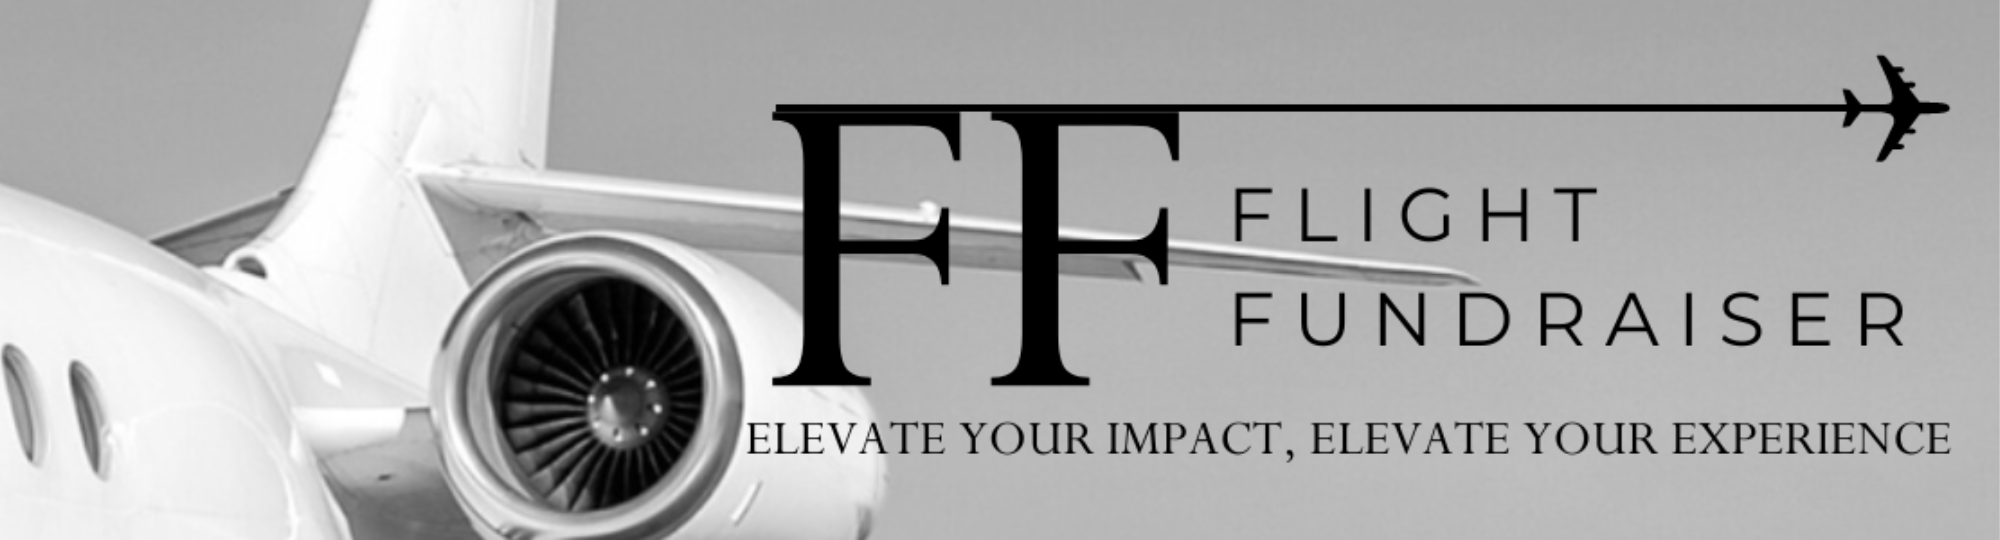 Image of a plane with Flight Fundraiser logo